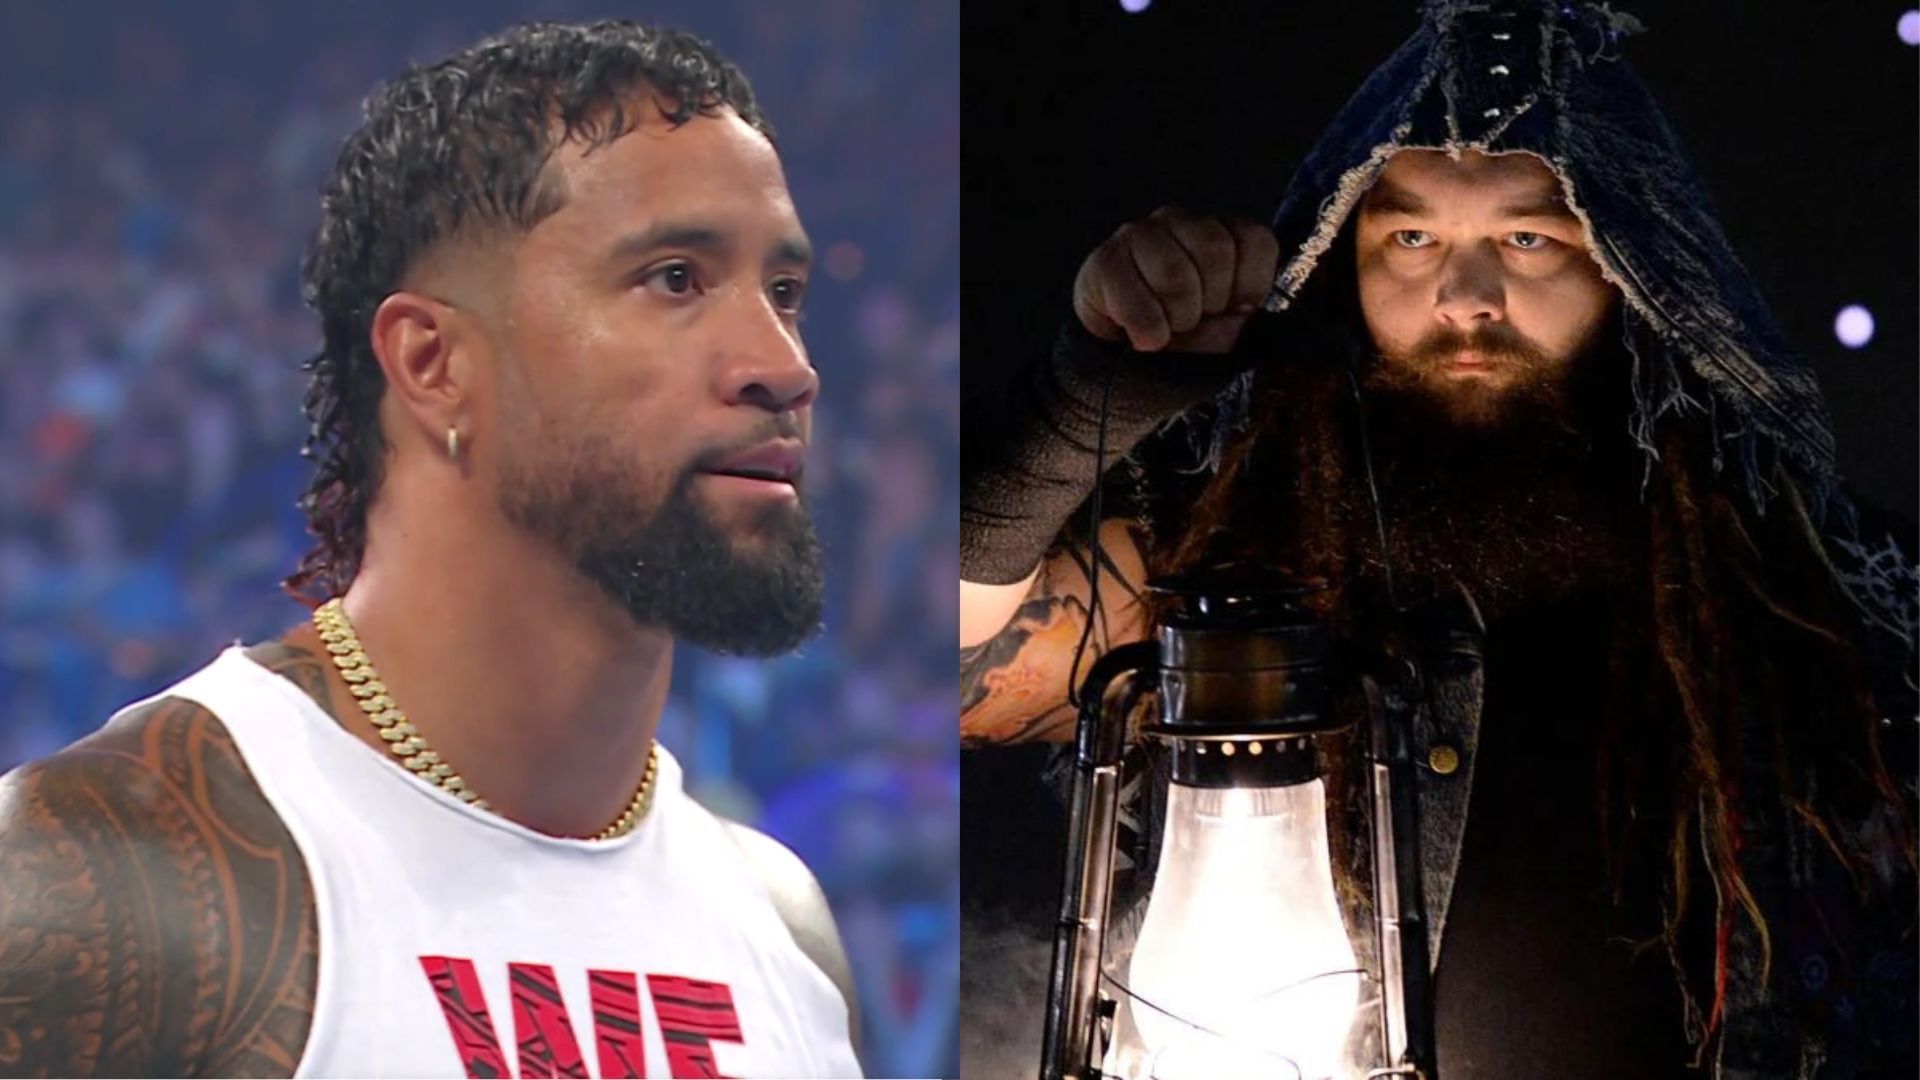 Jey Uso sent out a heartfelt message in honor of Bray Wyatt